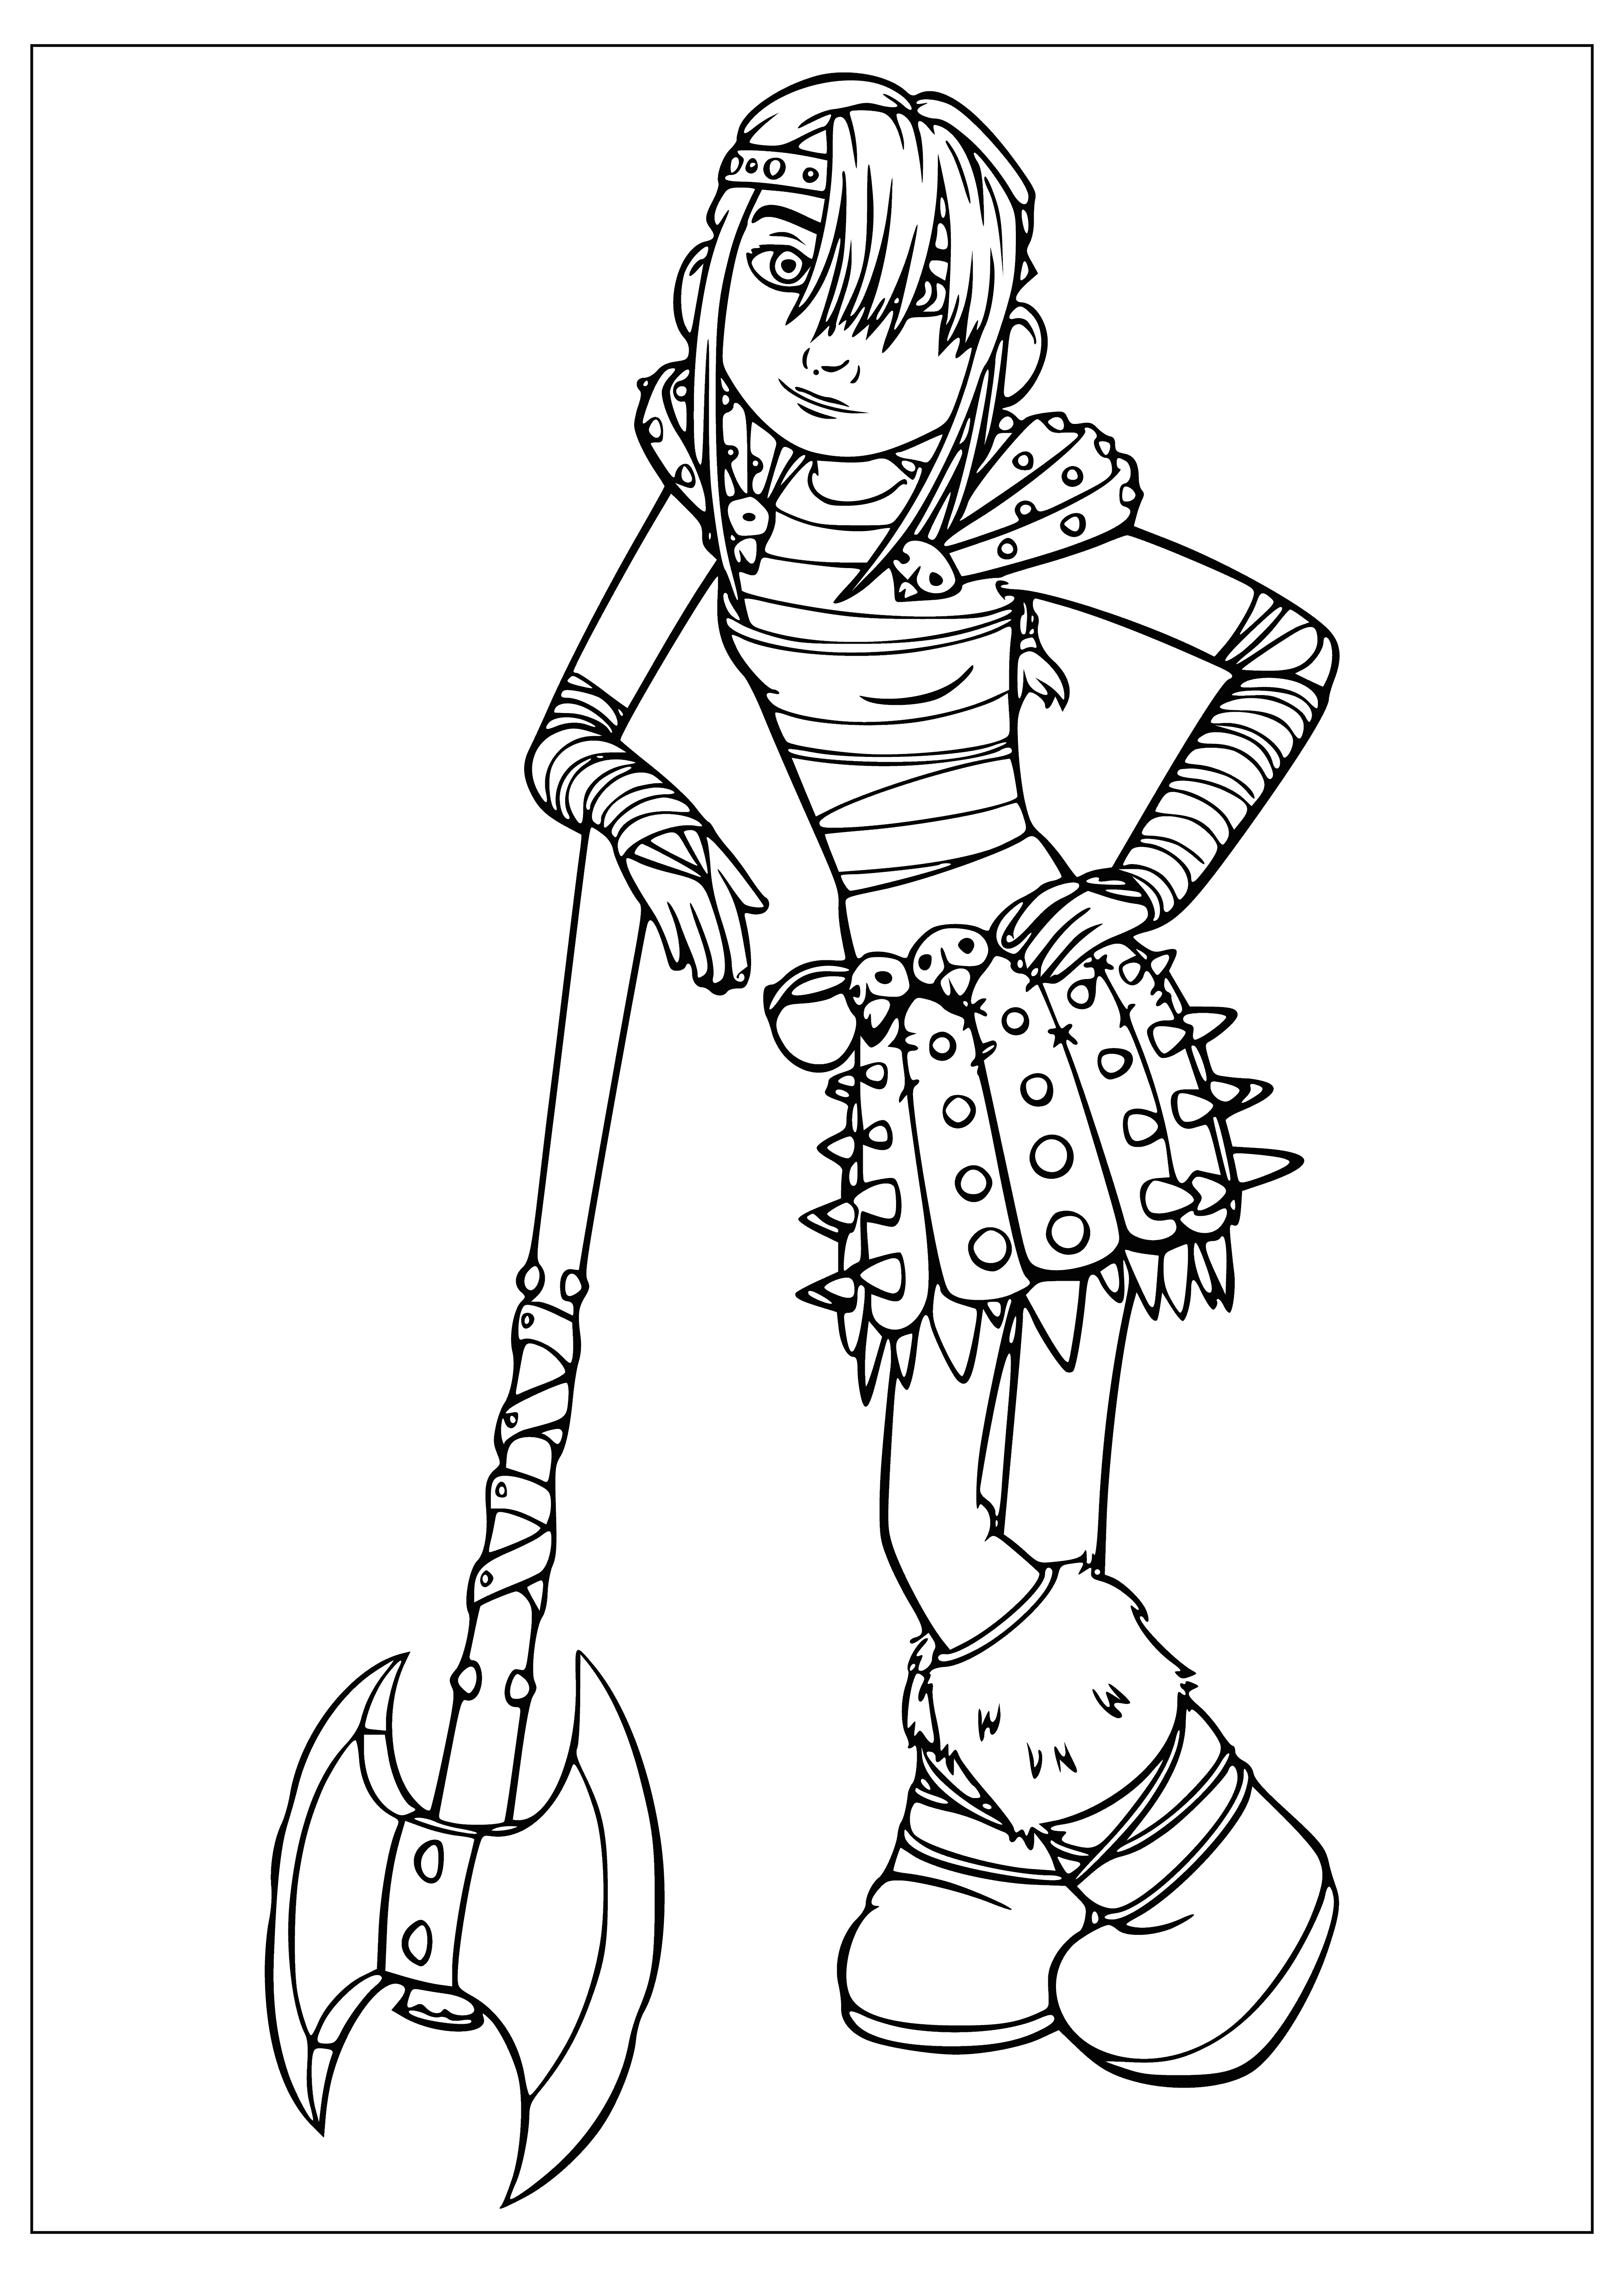 coloring page: Girl with long blonde hair & blue eyes stands w/ dragon (large, green scales). Girl wearing blue, boy wearing brown.